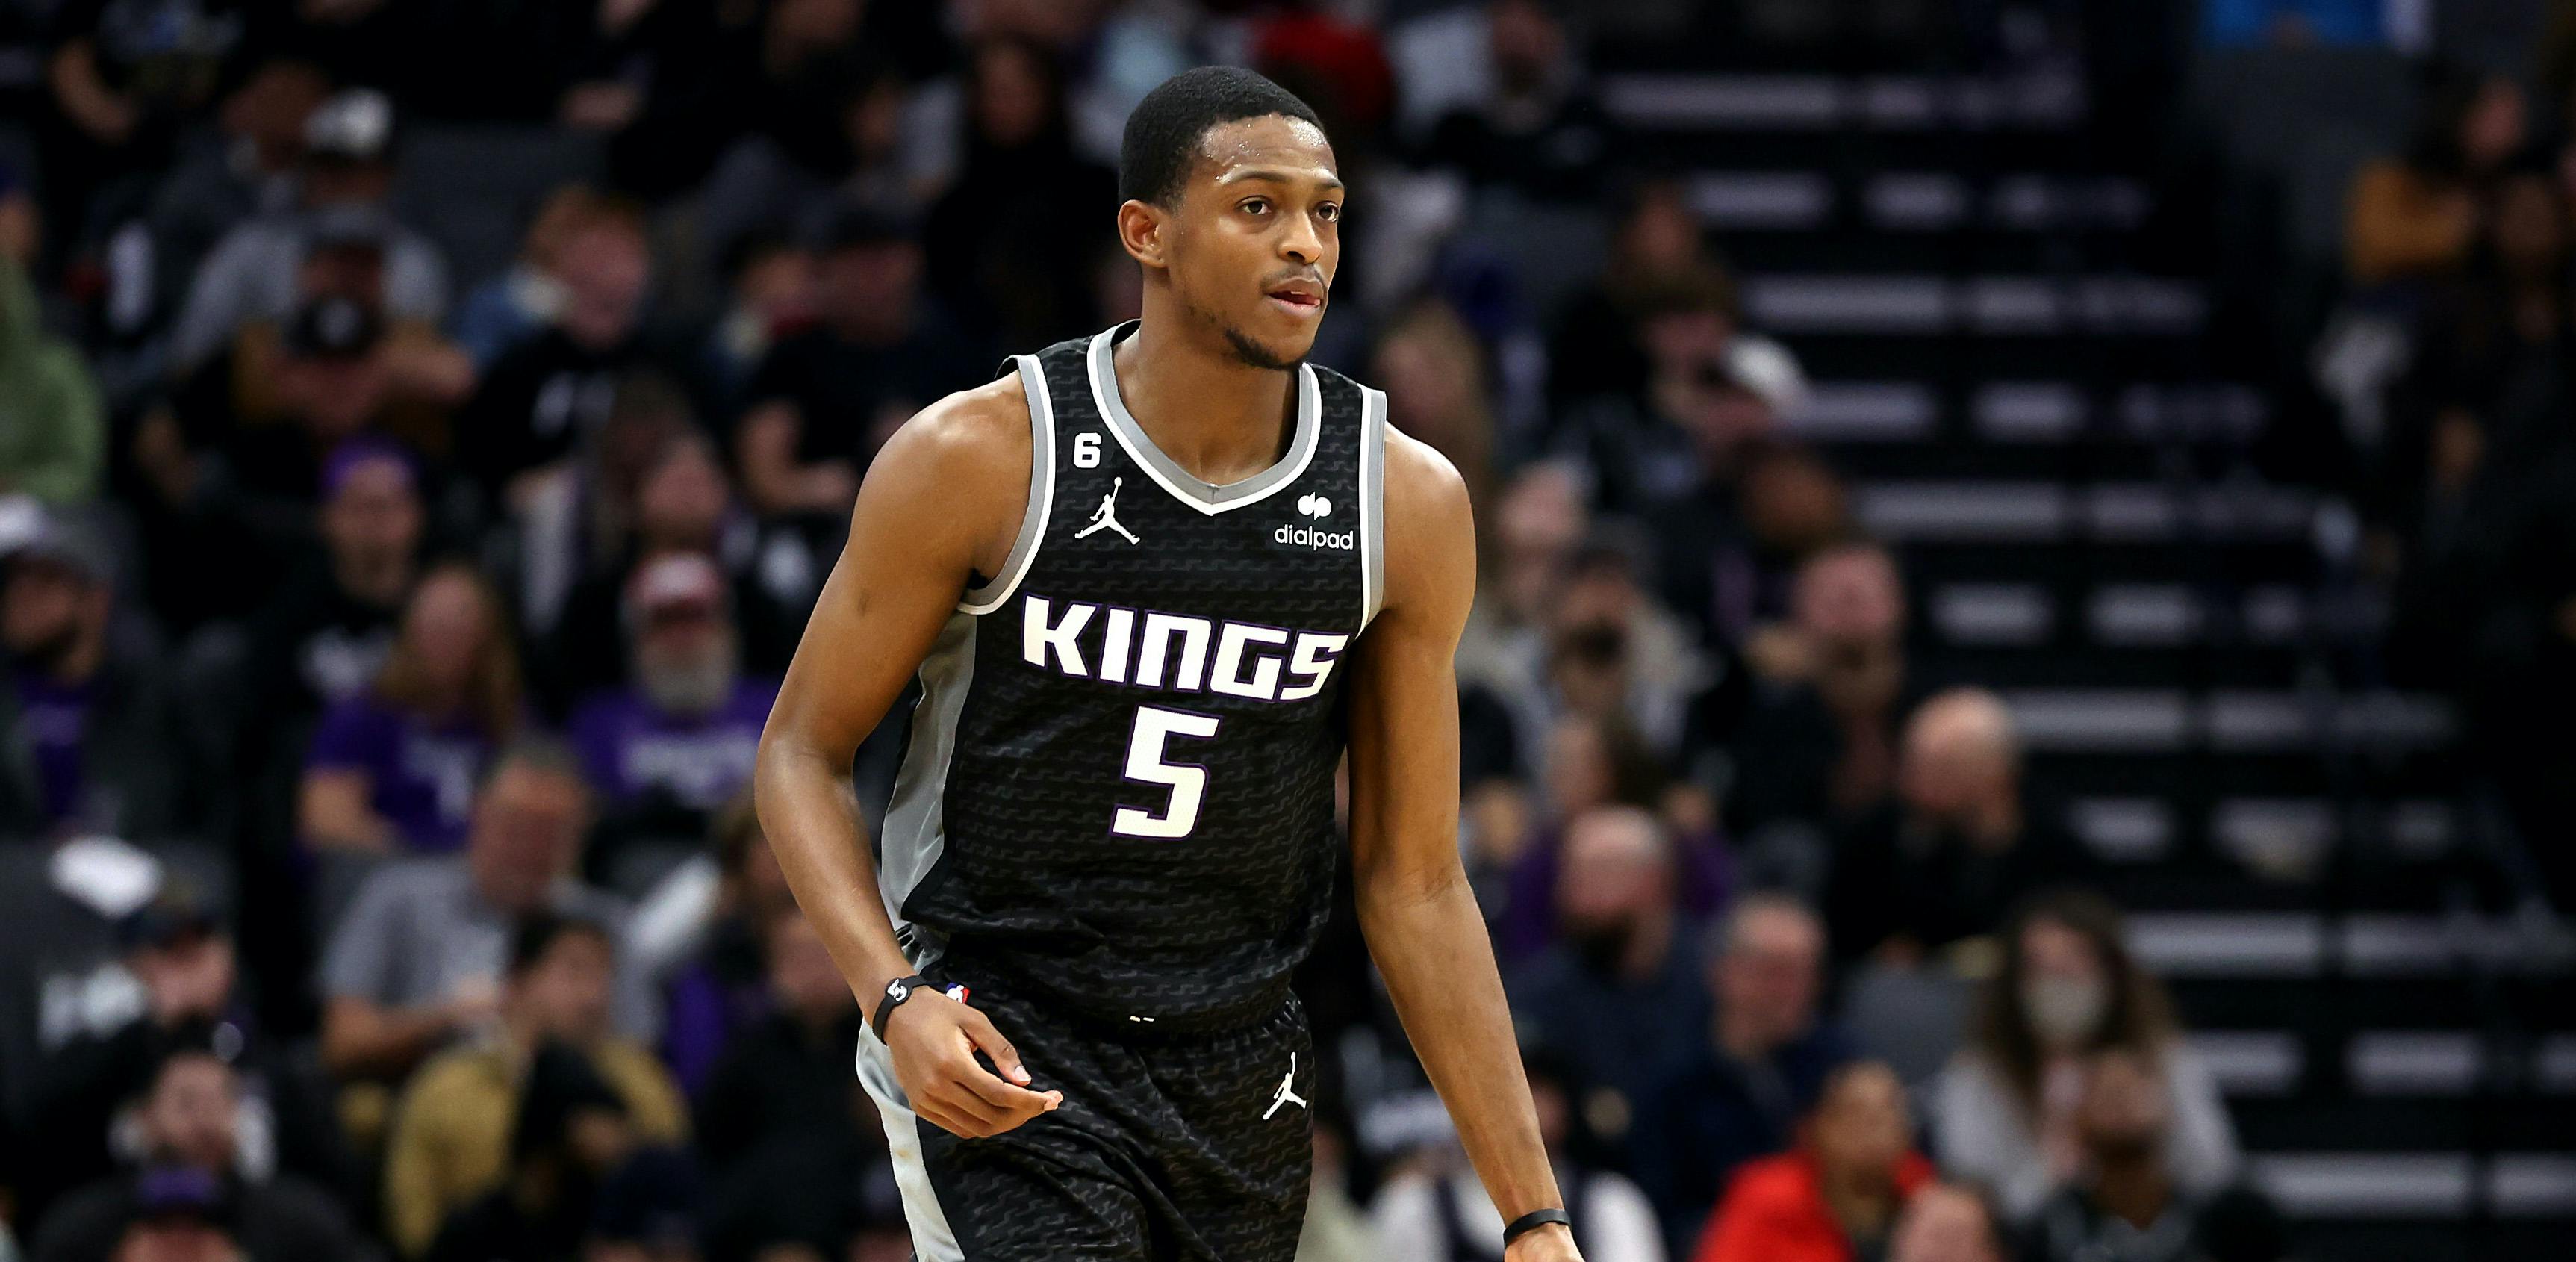 Top 3 NBA Player Props for February 26: De'Aaron Fox's Play Keeps Improving  - Oddstrader